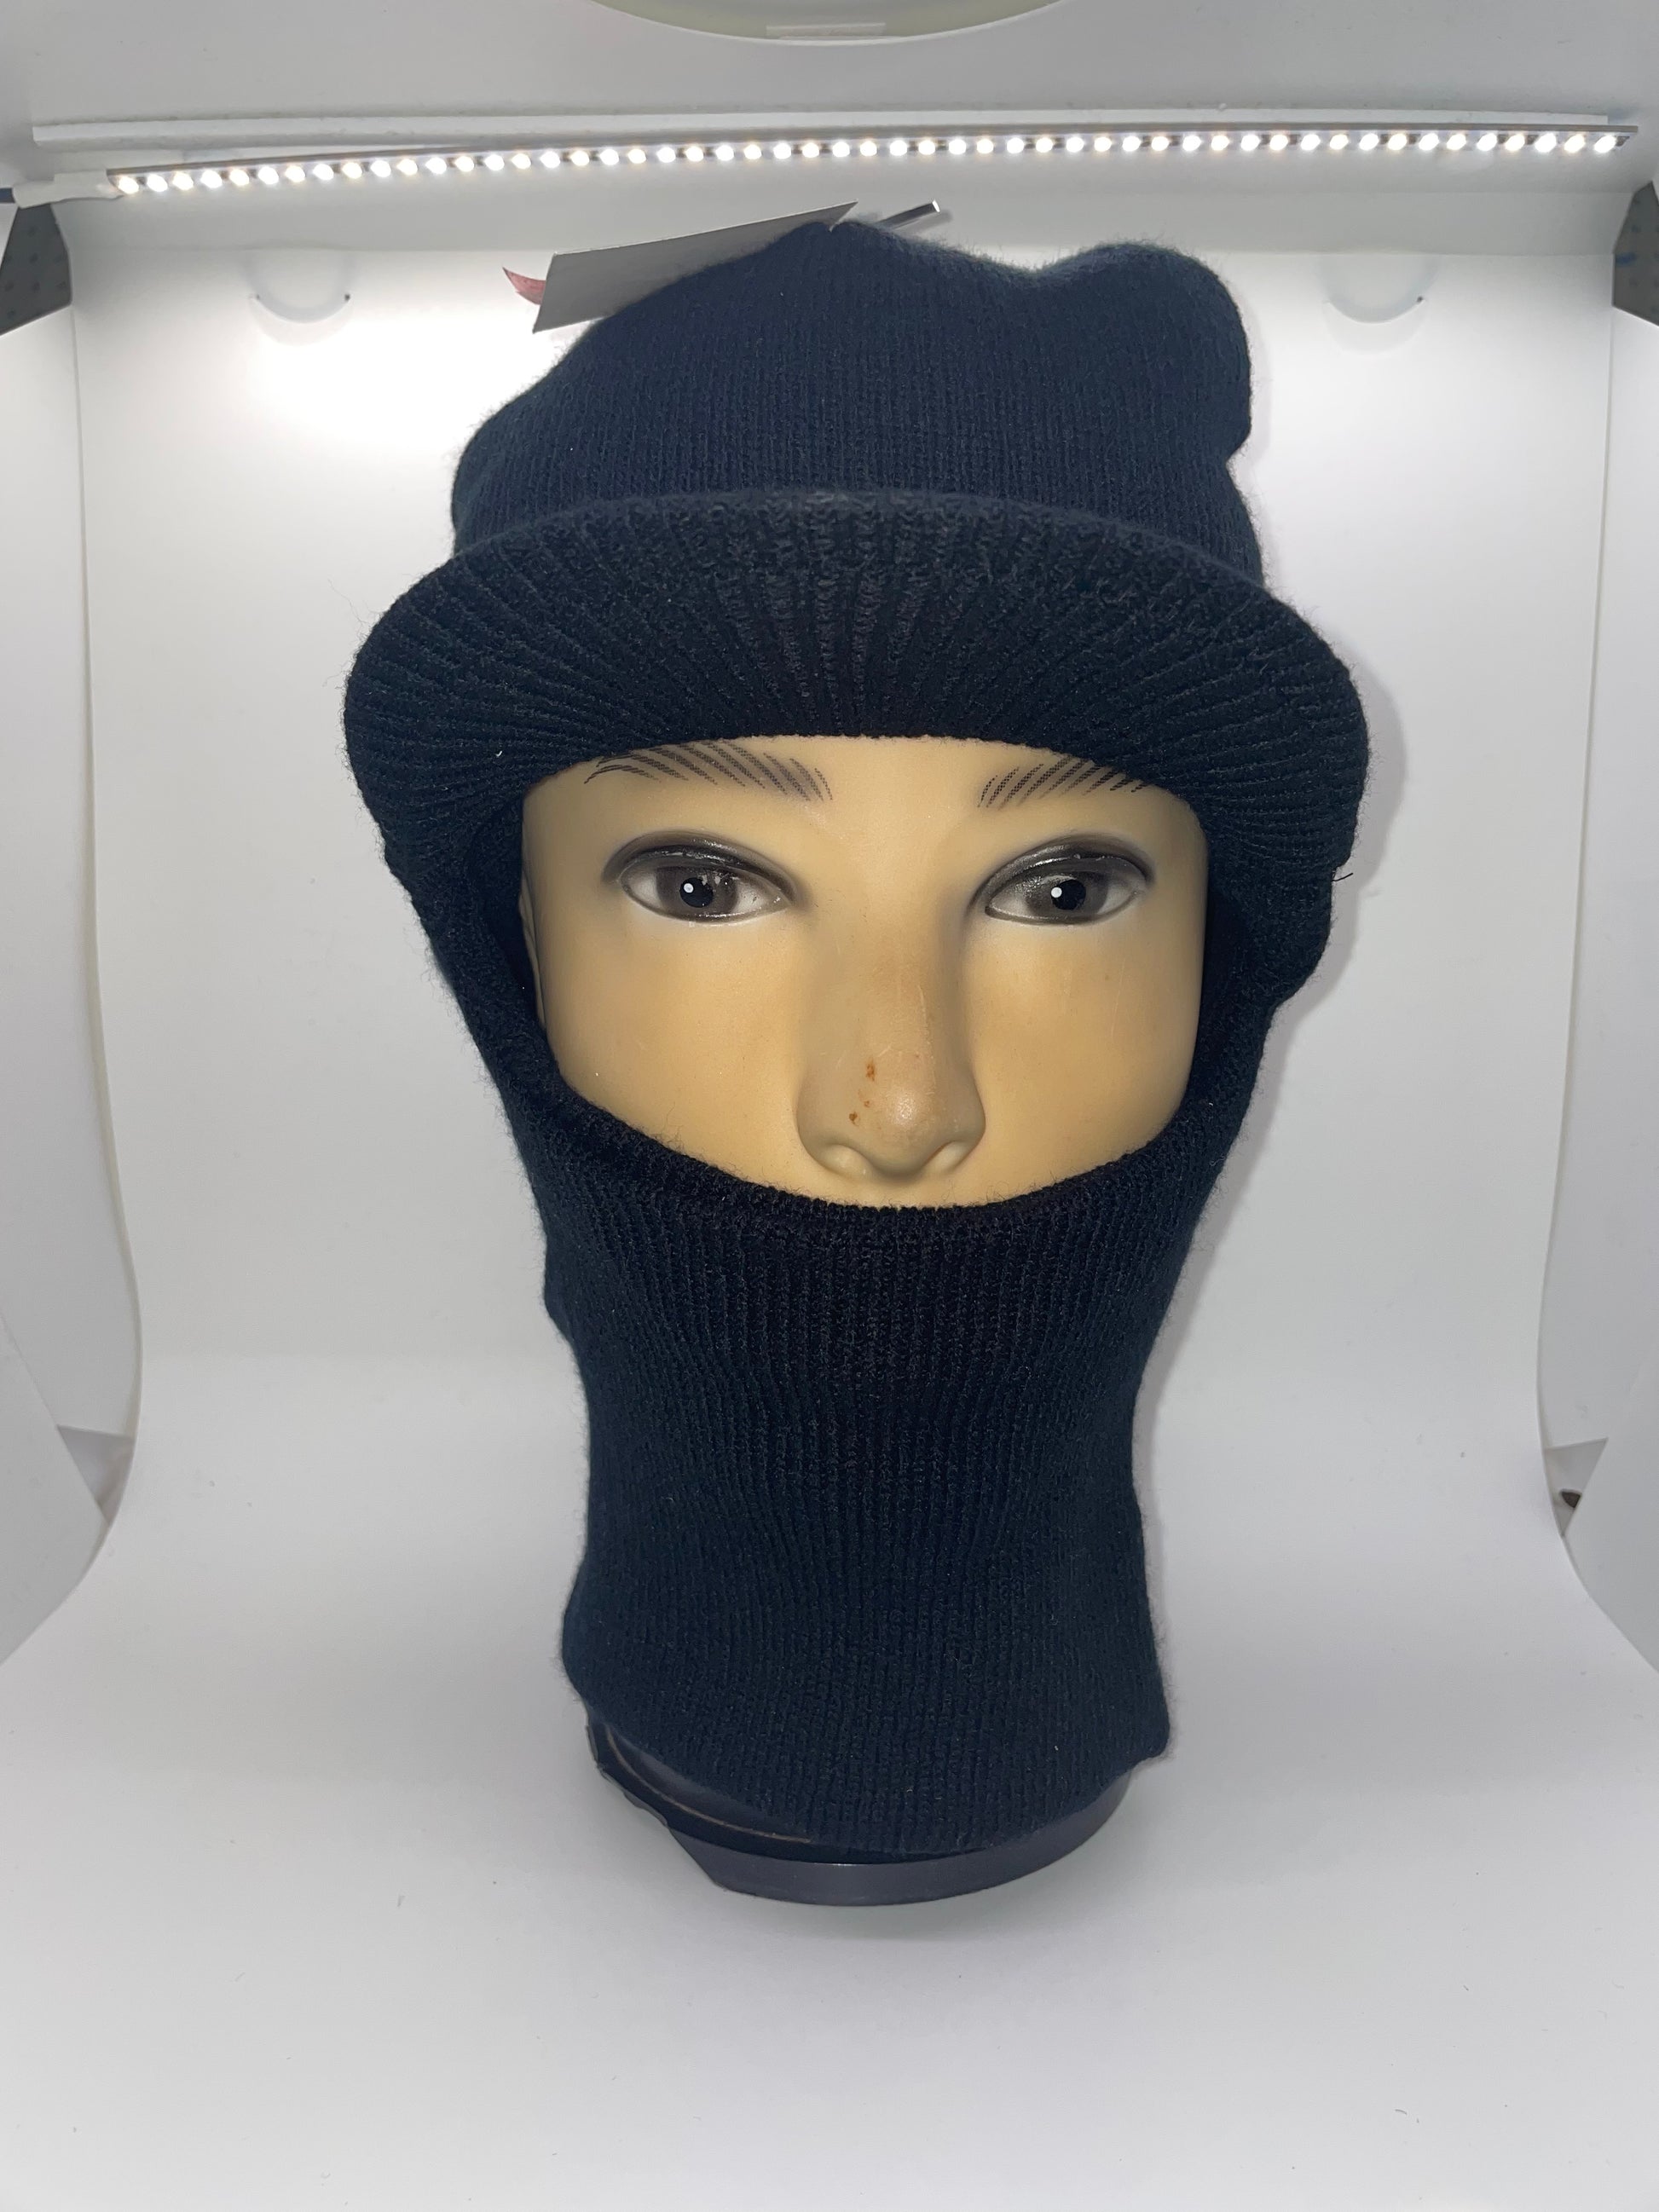 "Navy blue ski mask with a quilted texture and a reinforced heel and toe"